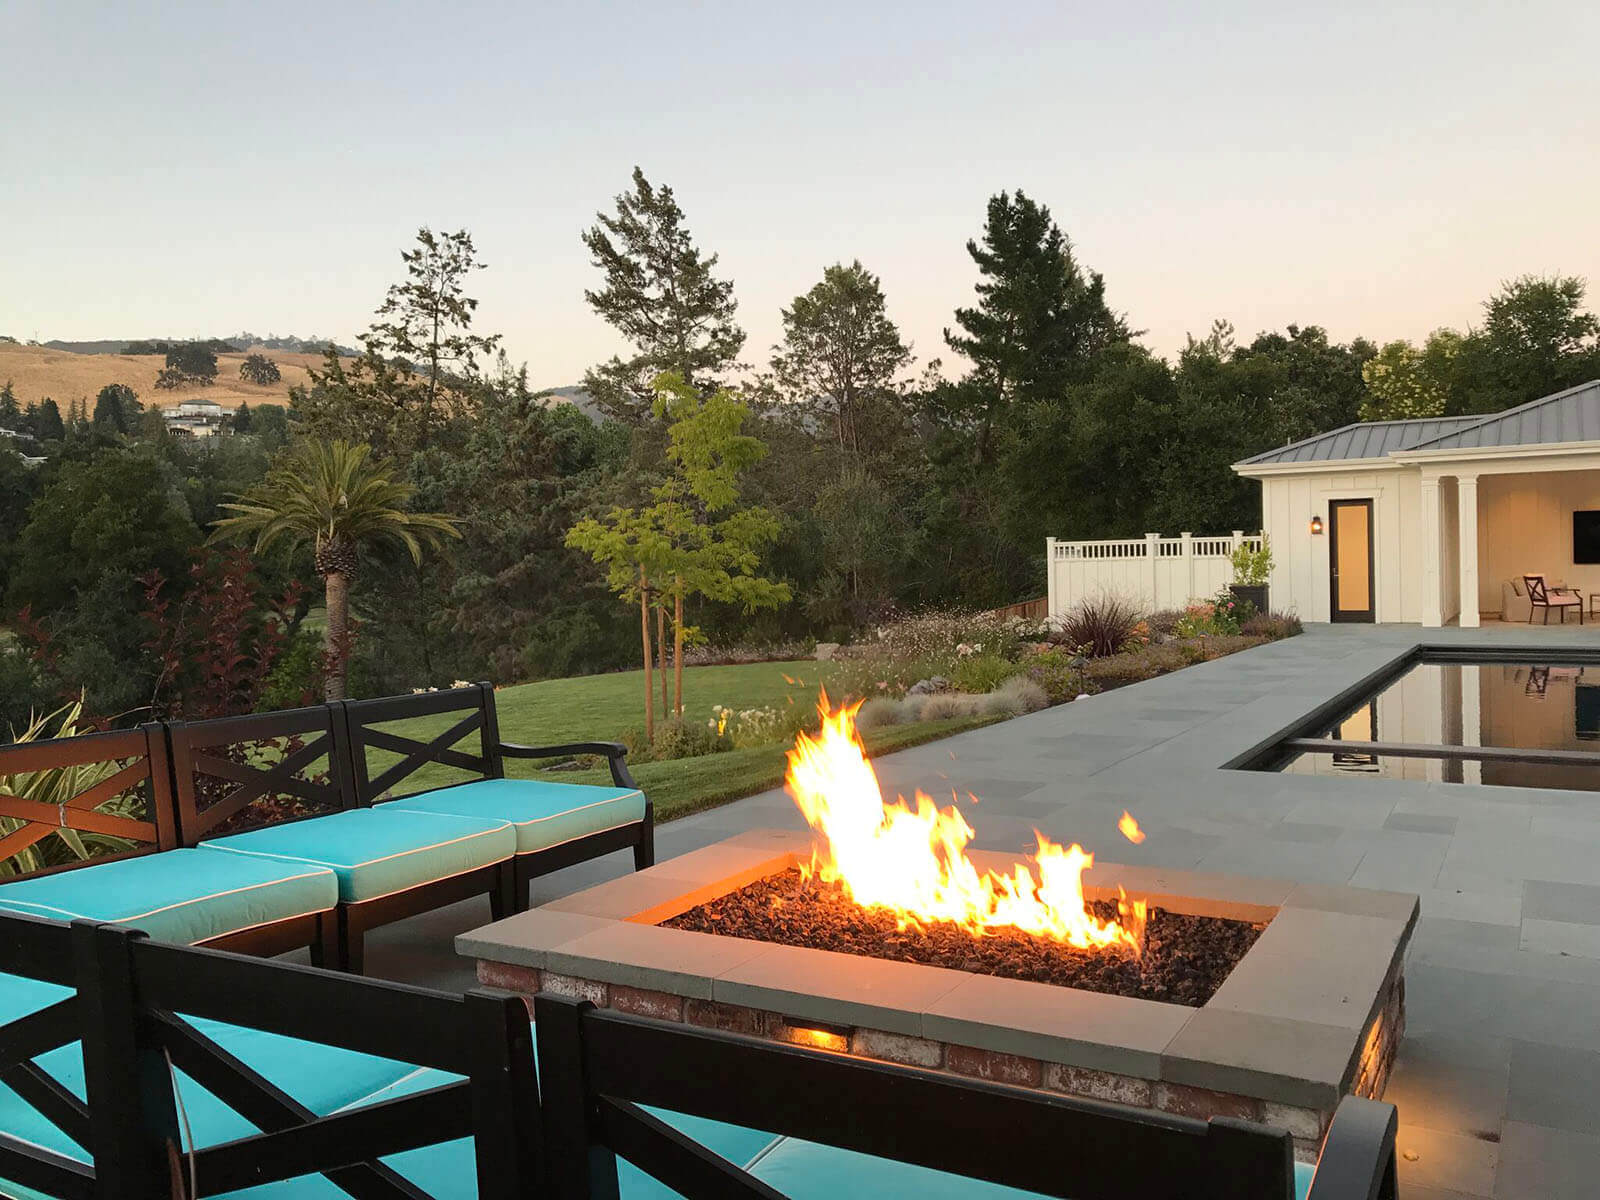 Black outdoor sectional with light blue accent cushions surrounds a low rectangular gas firepit. The bluestone patio and ultra-contemporary pool and spa beyond look out on a California-style landscape.